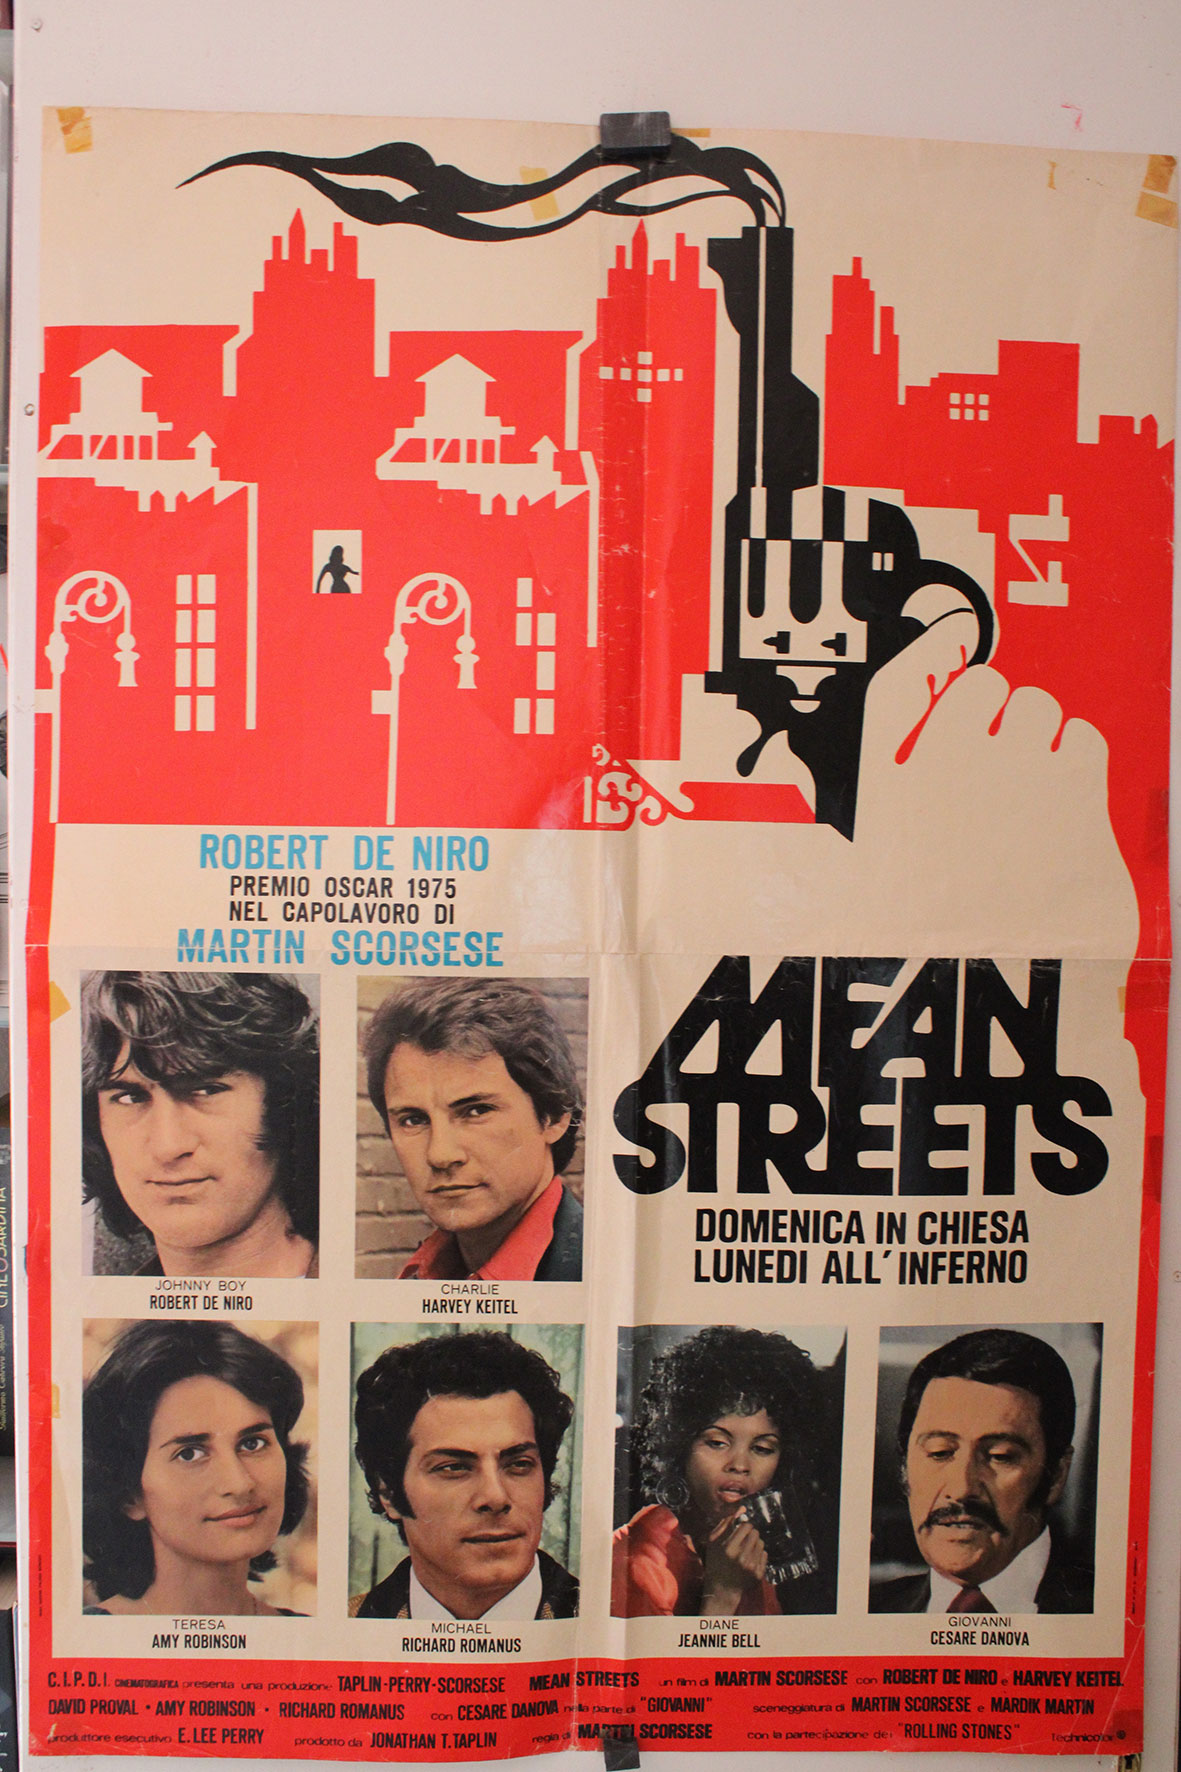 MEAN STREETS